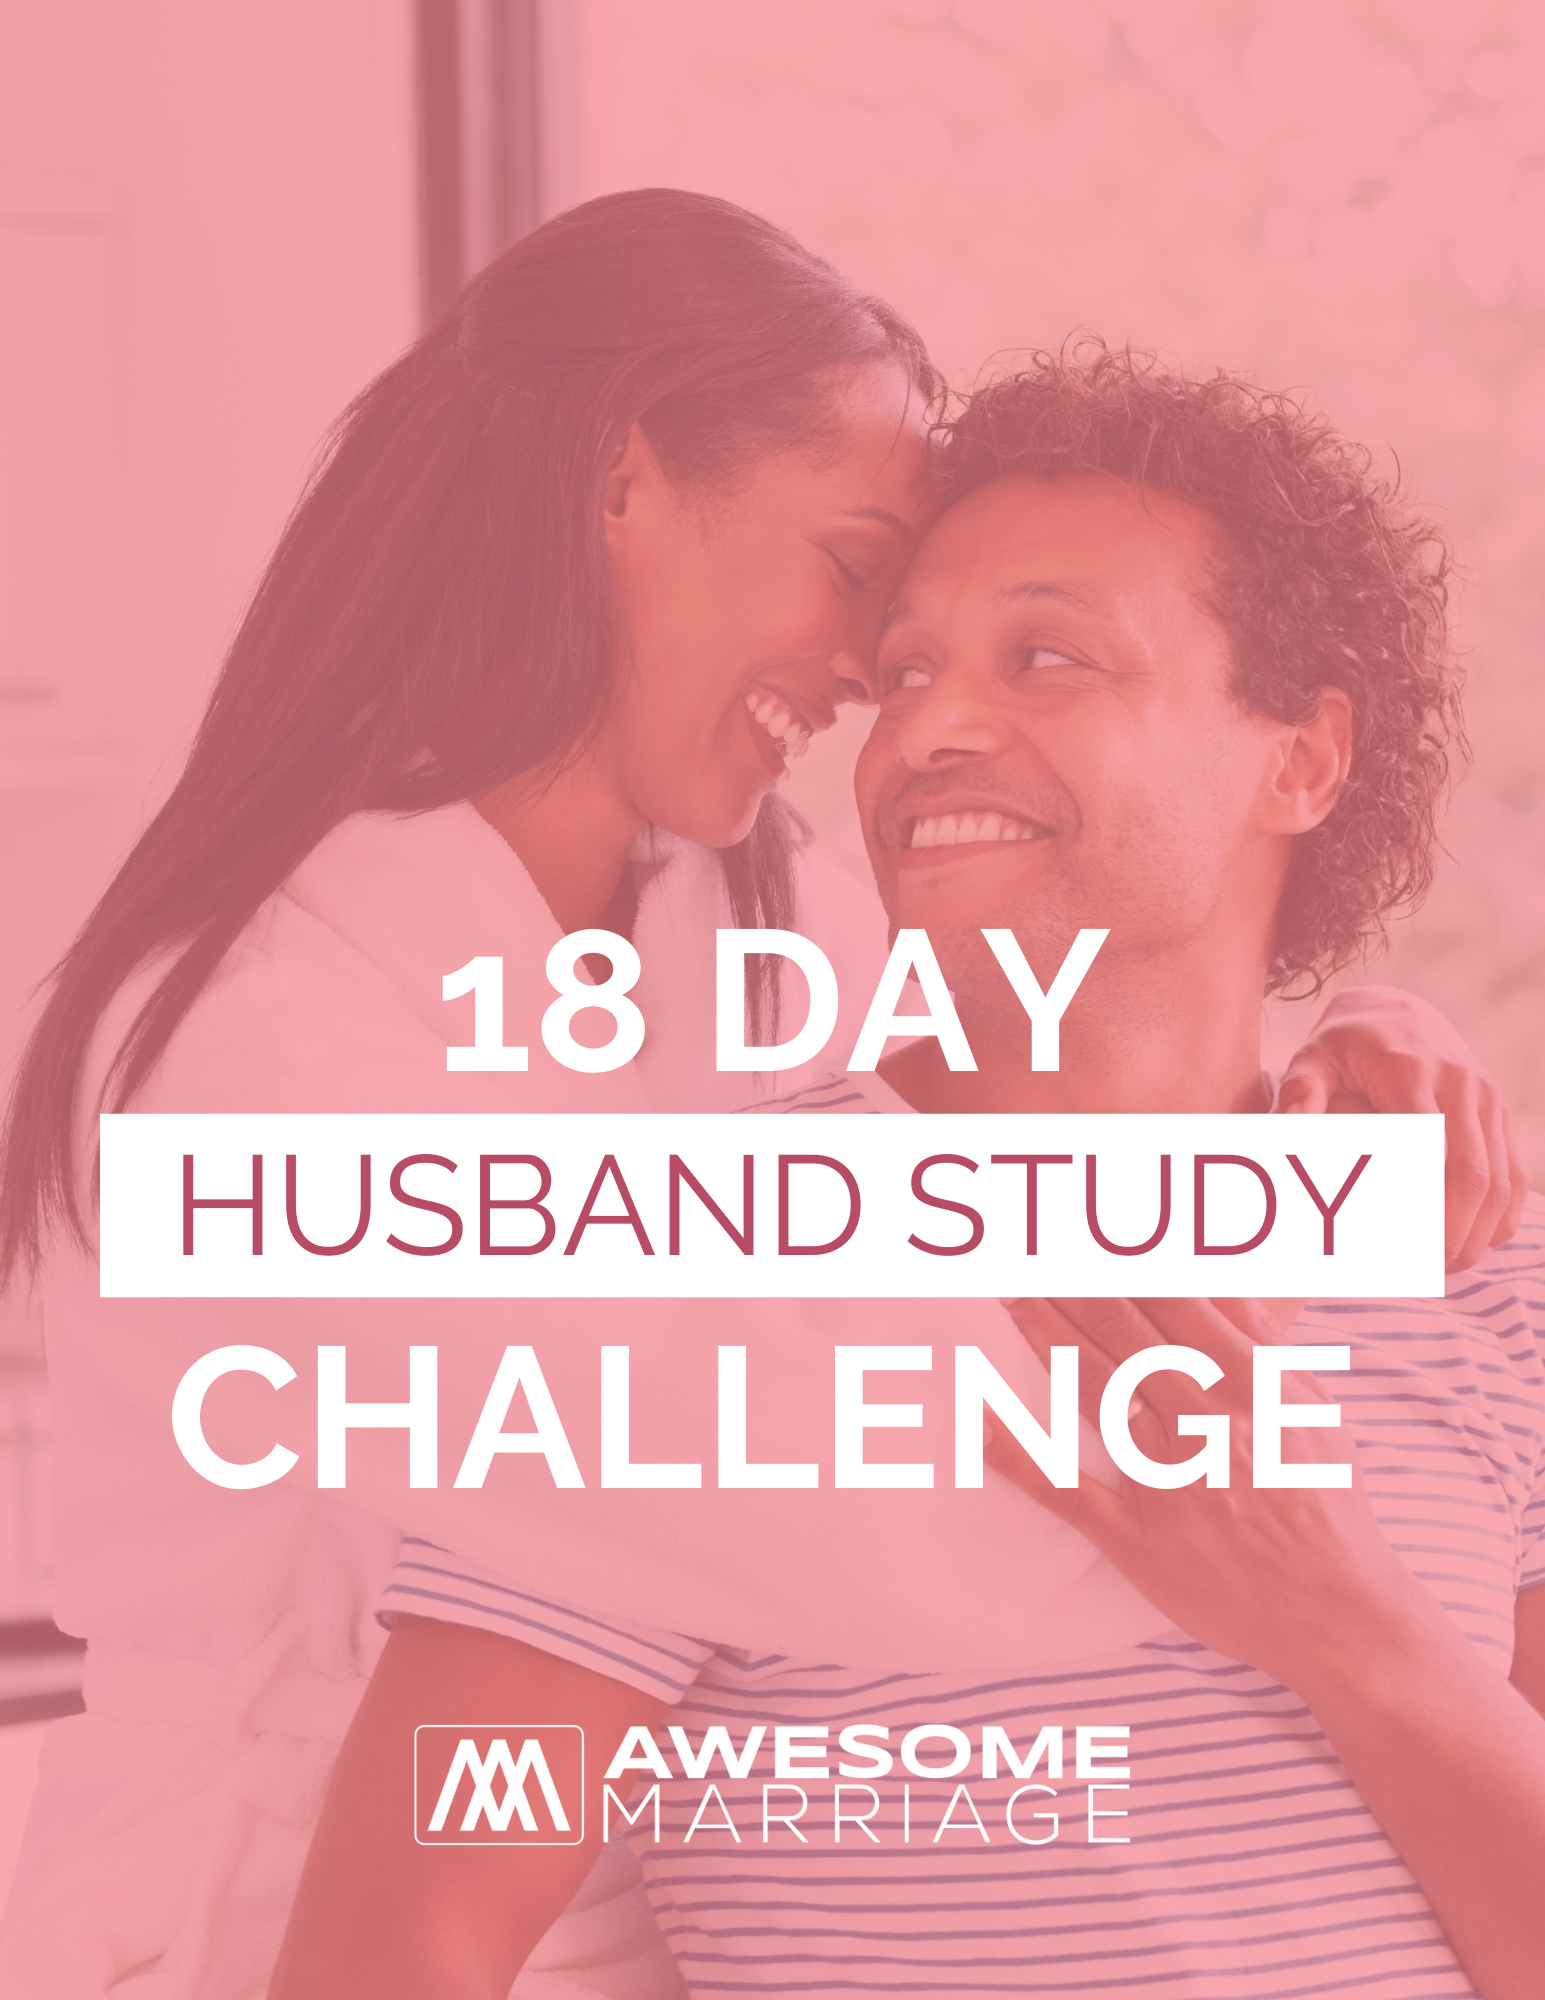 Marriage Multiplier On better sex, studying your husband, and being the Holy Spirit pic